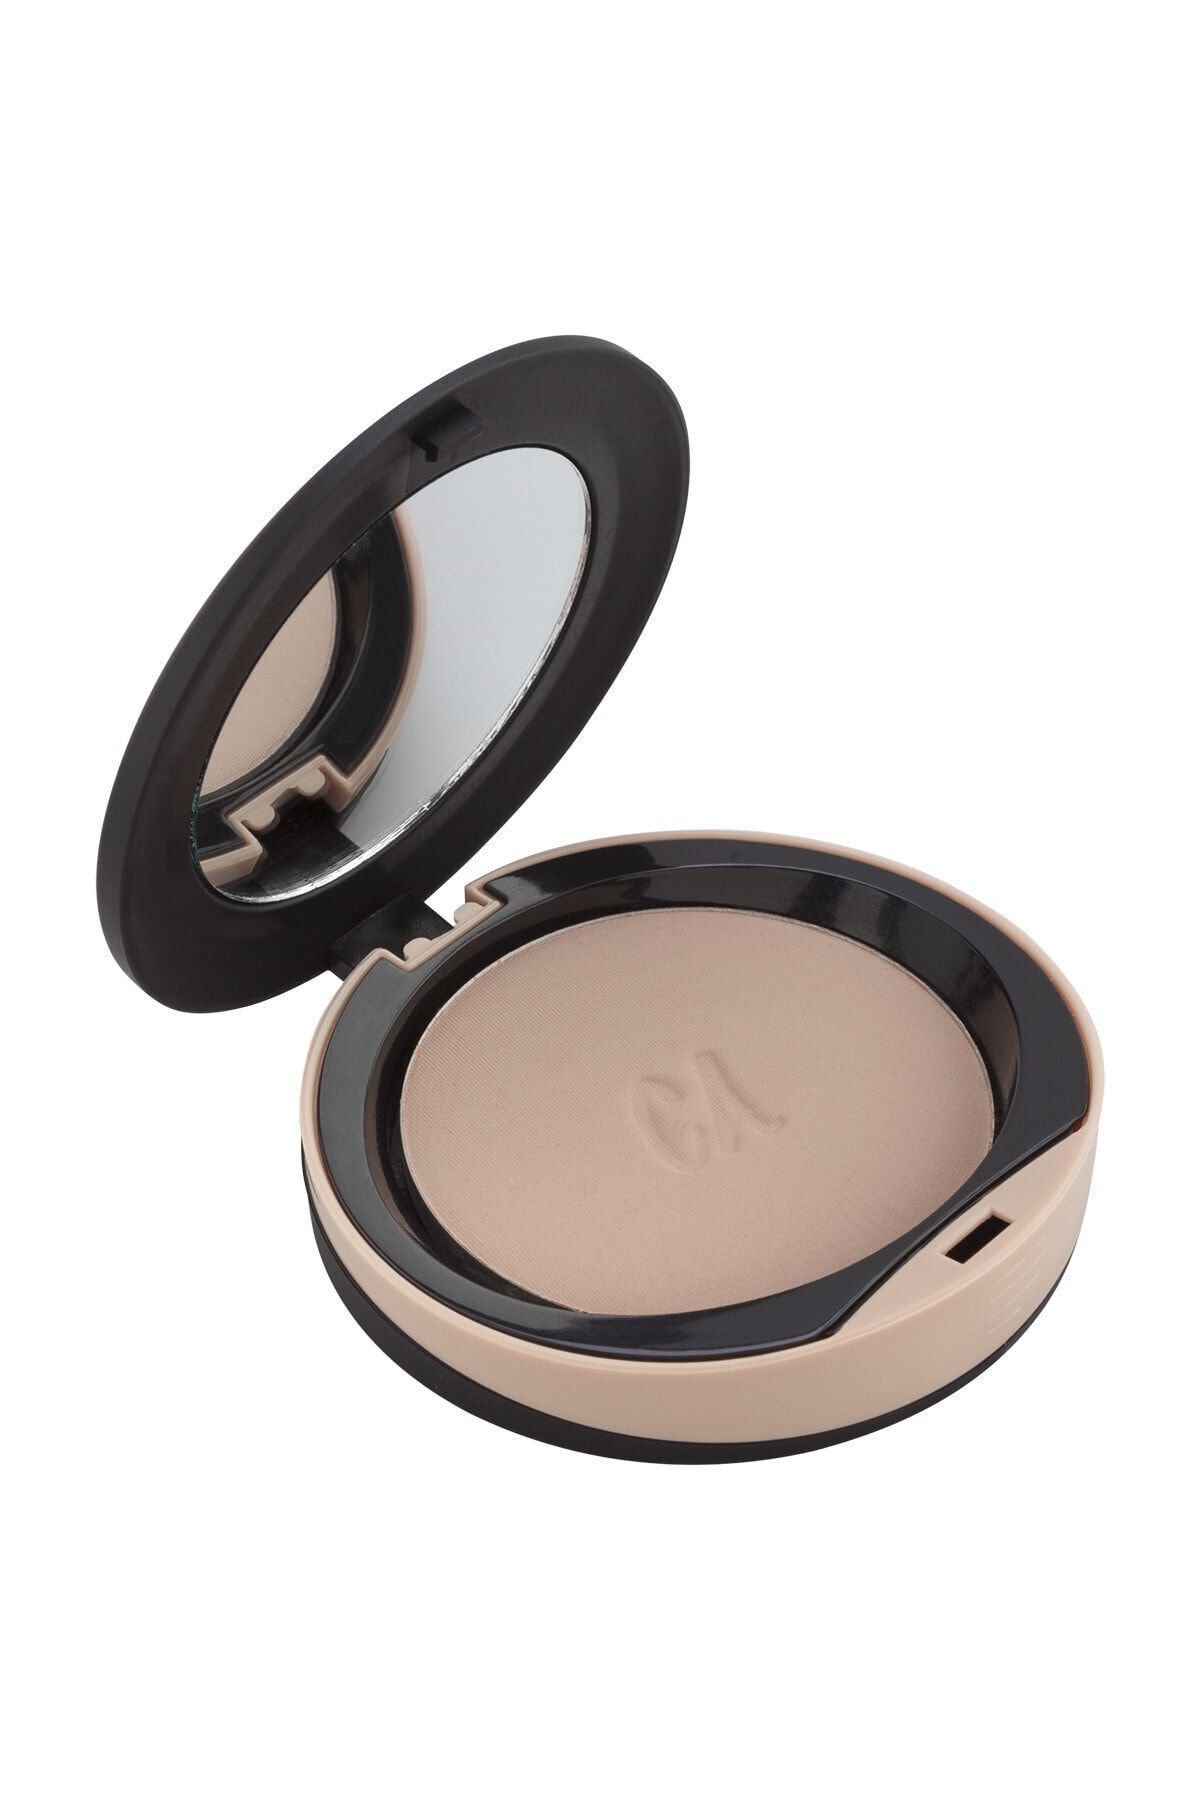 Catherine Arley Mineral Matte Compact Powder -m04- (Mineral Mat Pudra) - 2048